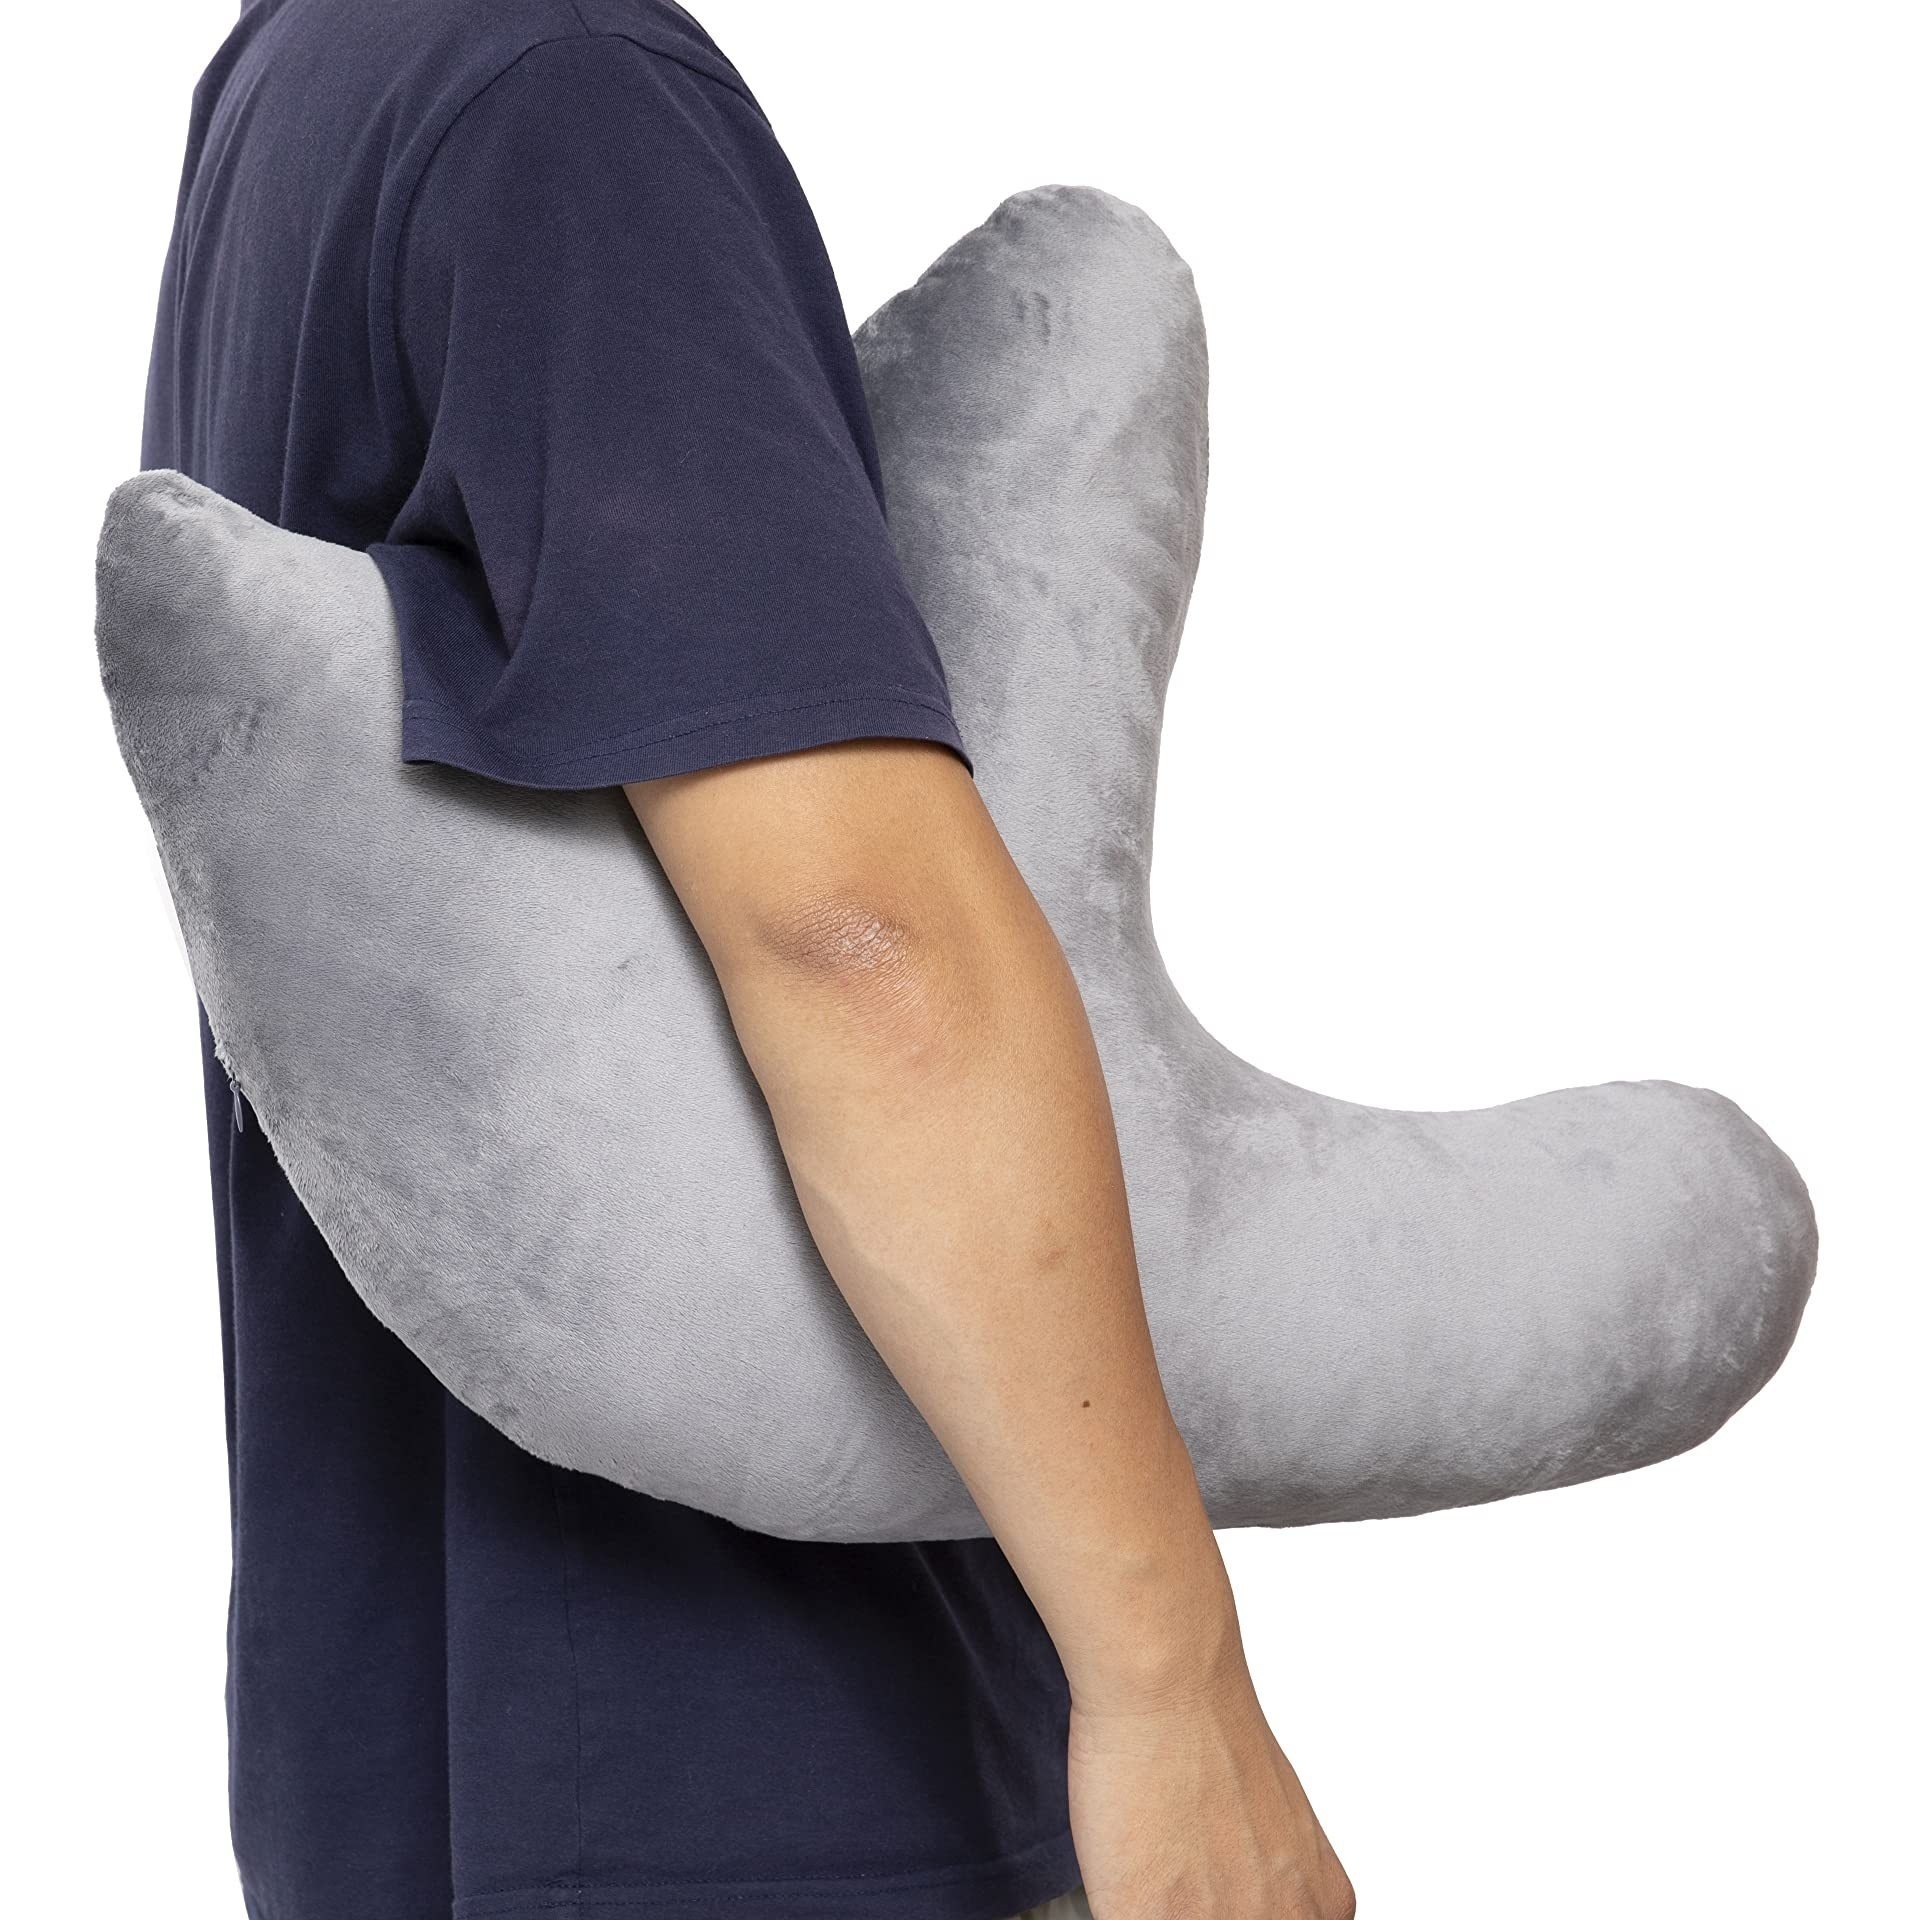 10 Best Pillows for Shoulder Surgery Recovery and Shoulder Pain Relief